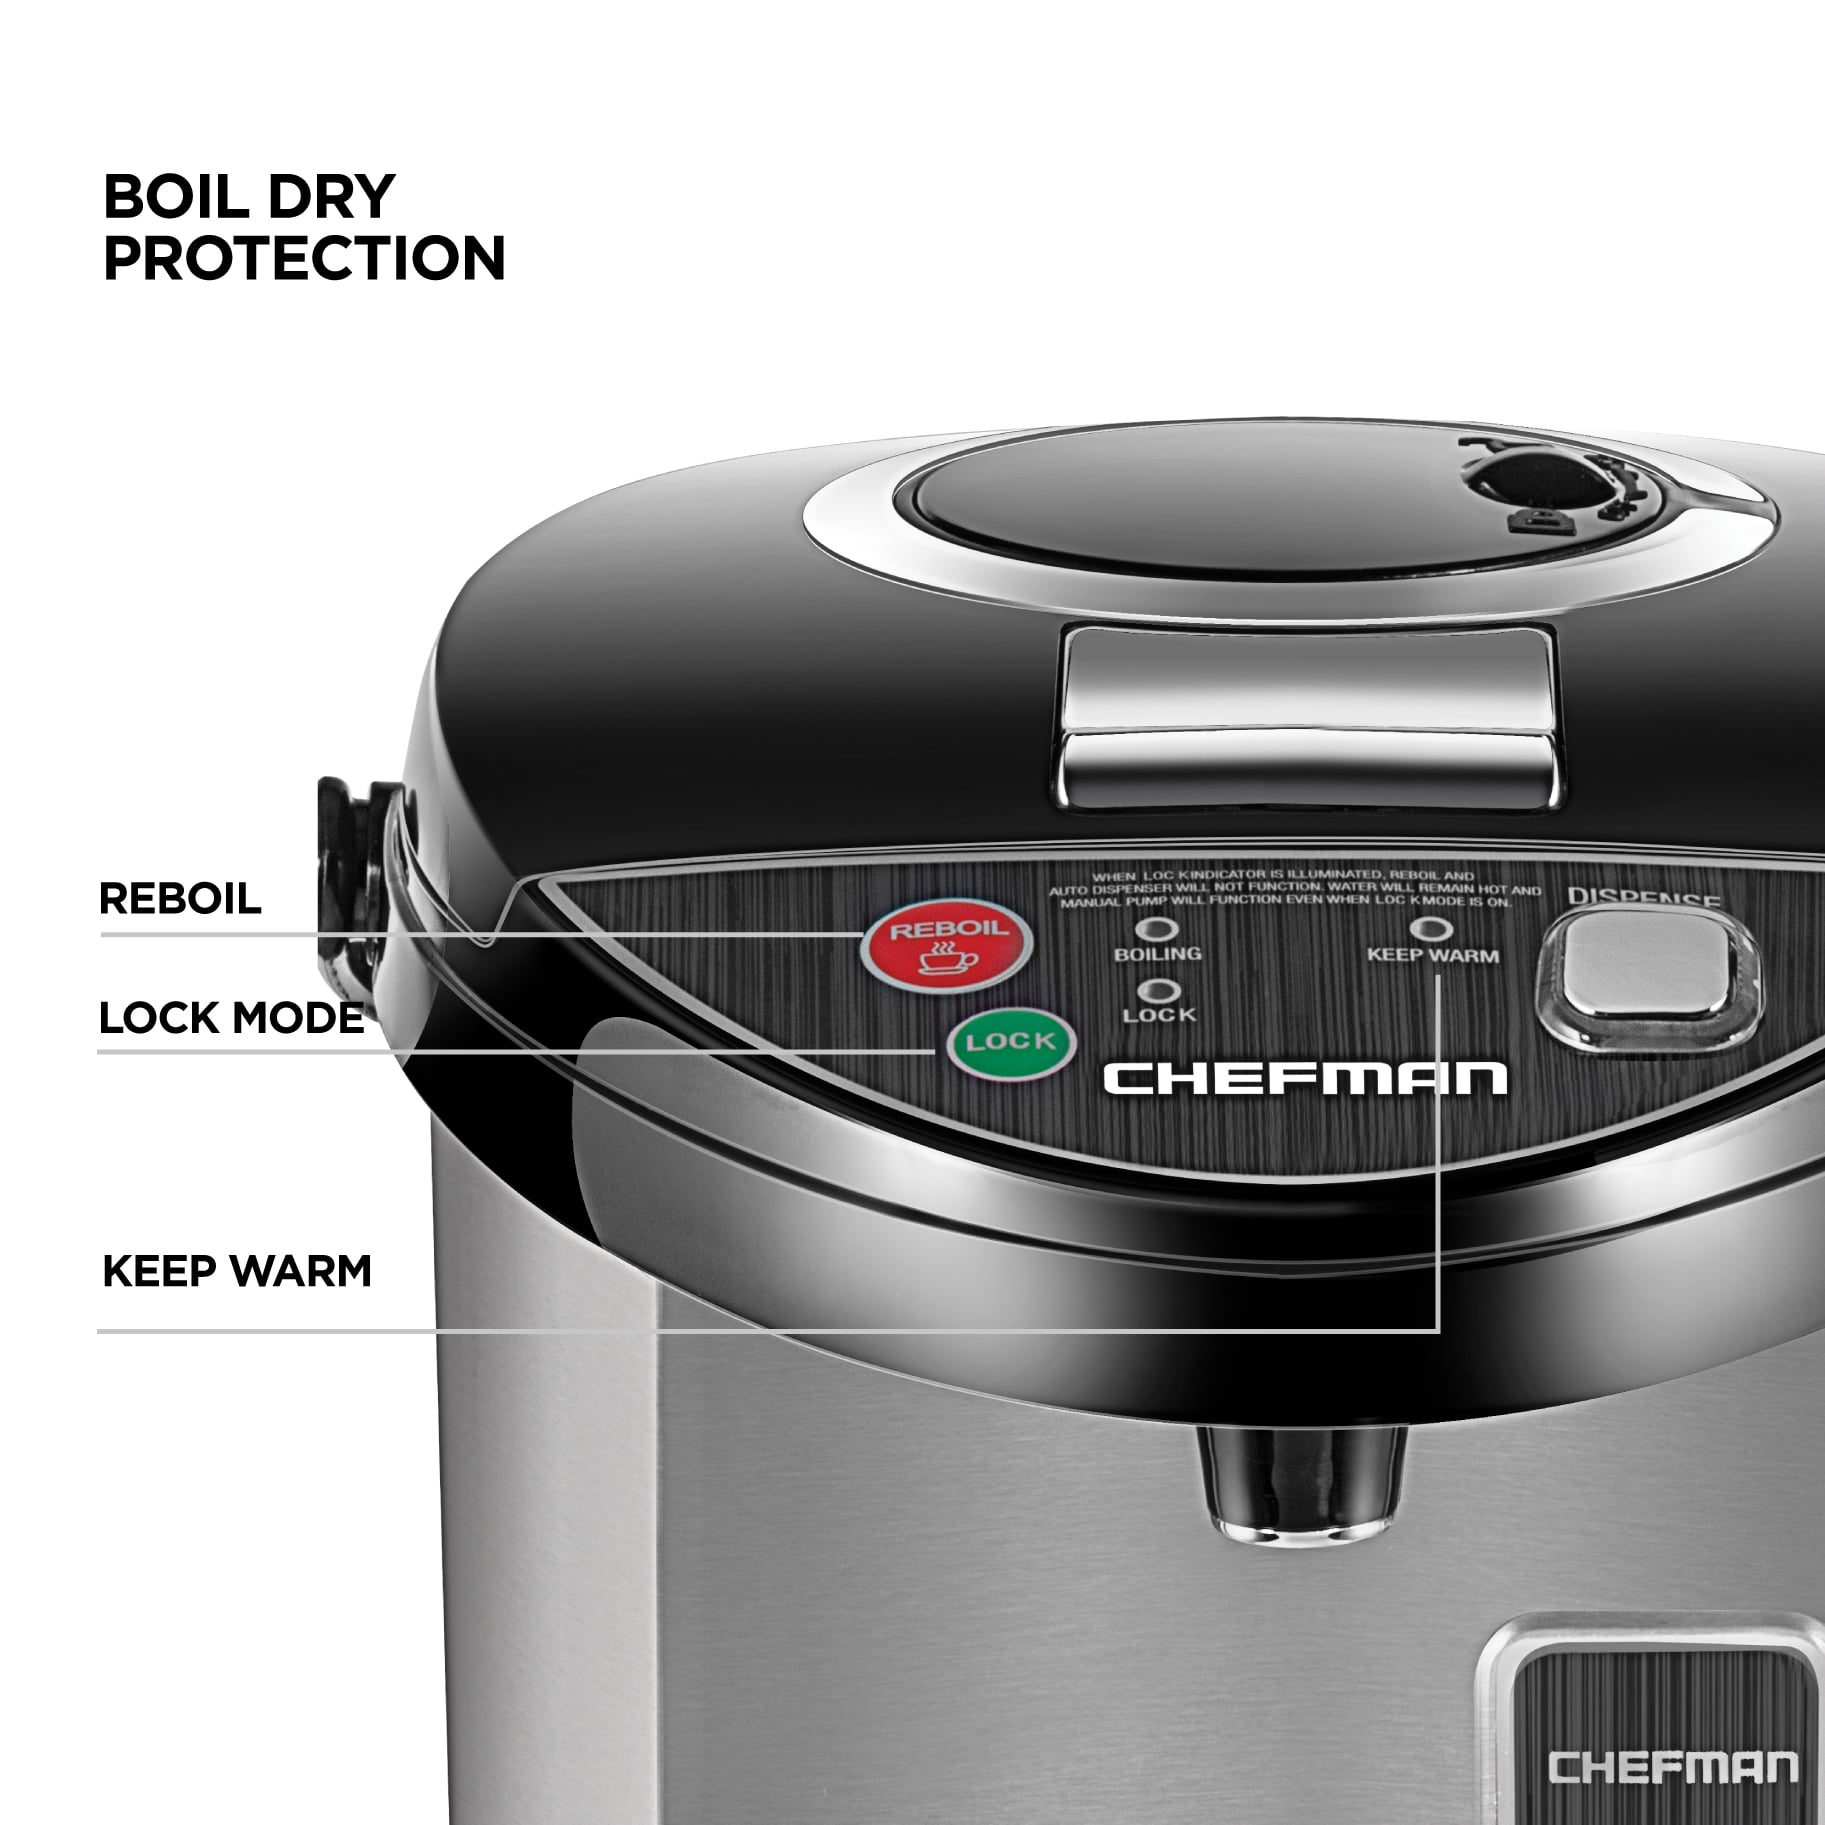 Chefman Electric Hot Water Pot Urn w/ Manual Dispense Buttons, Safety Lock,  Instant Heating for Coffee & Tea, Auto-Shutoff/Boil Dry Protection